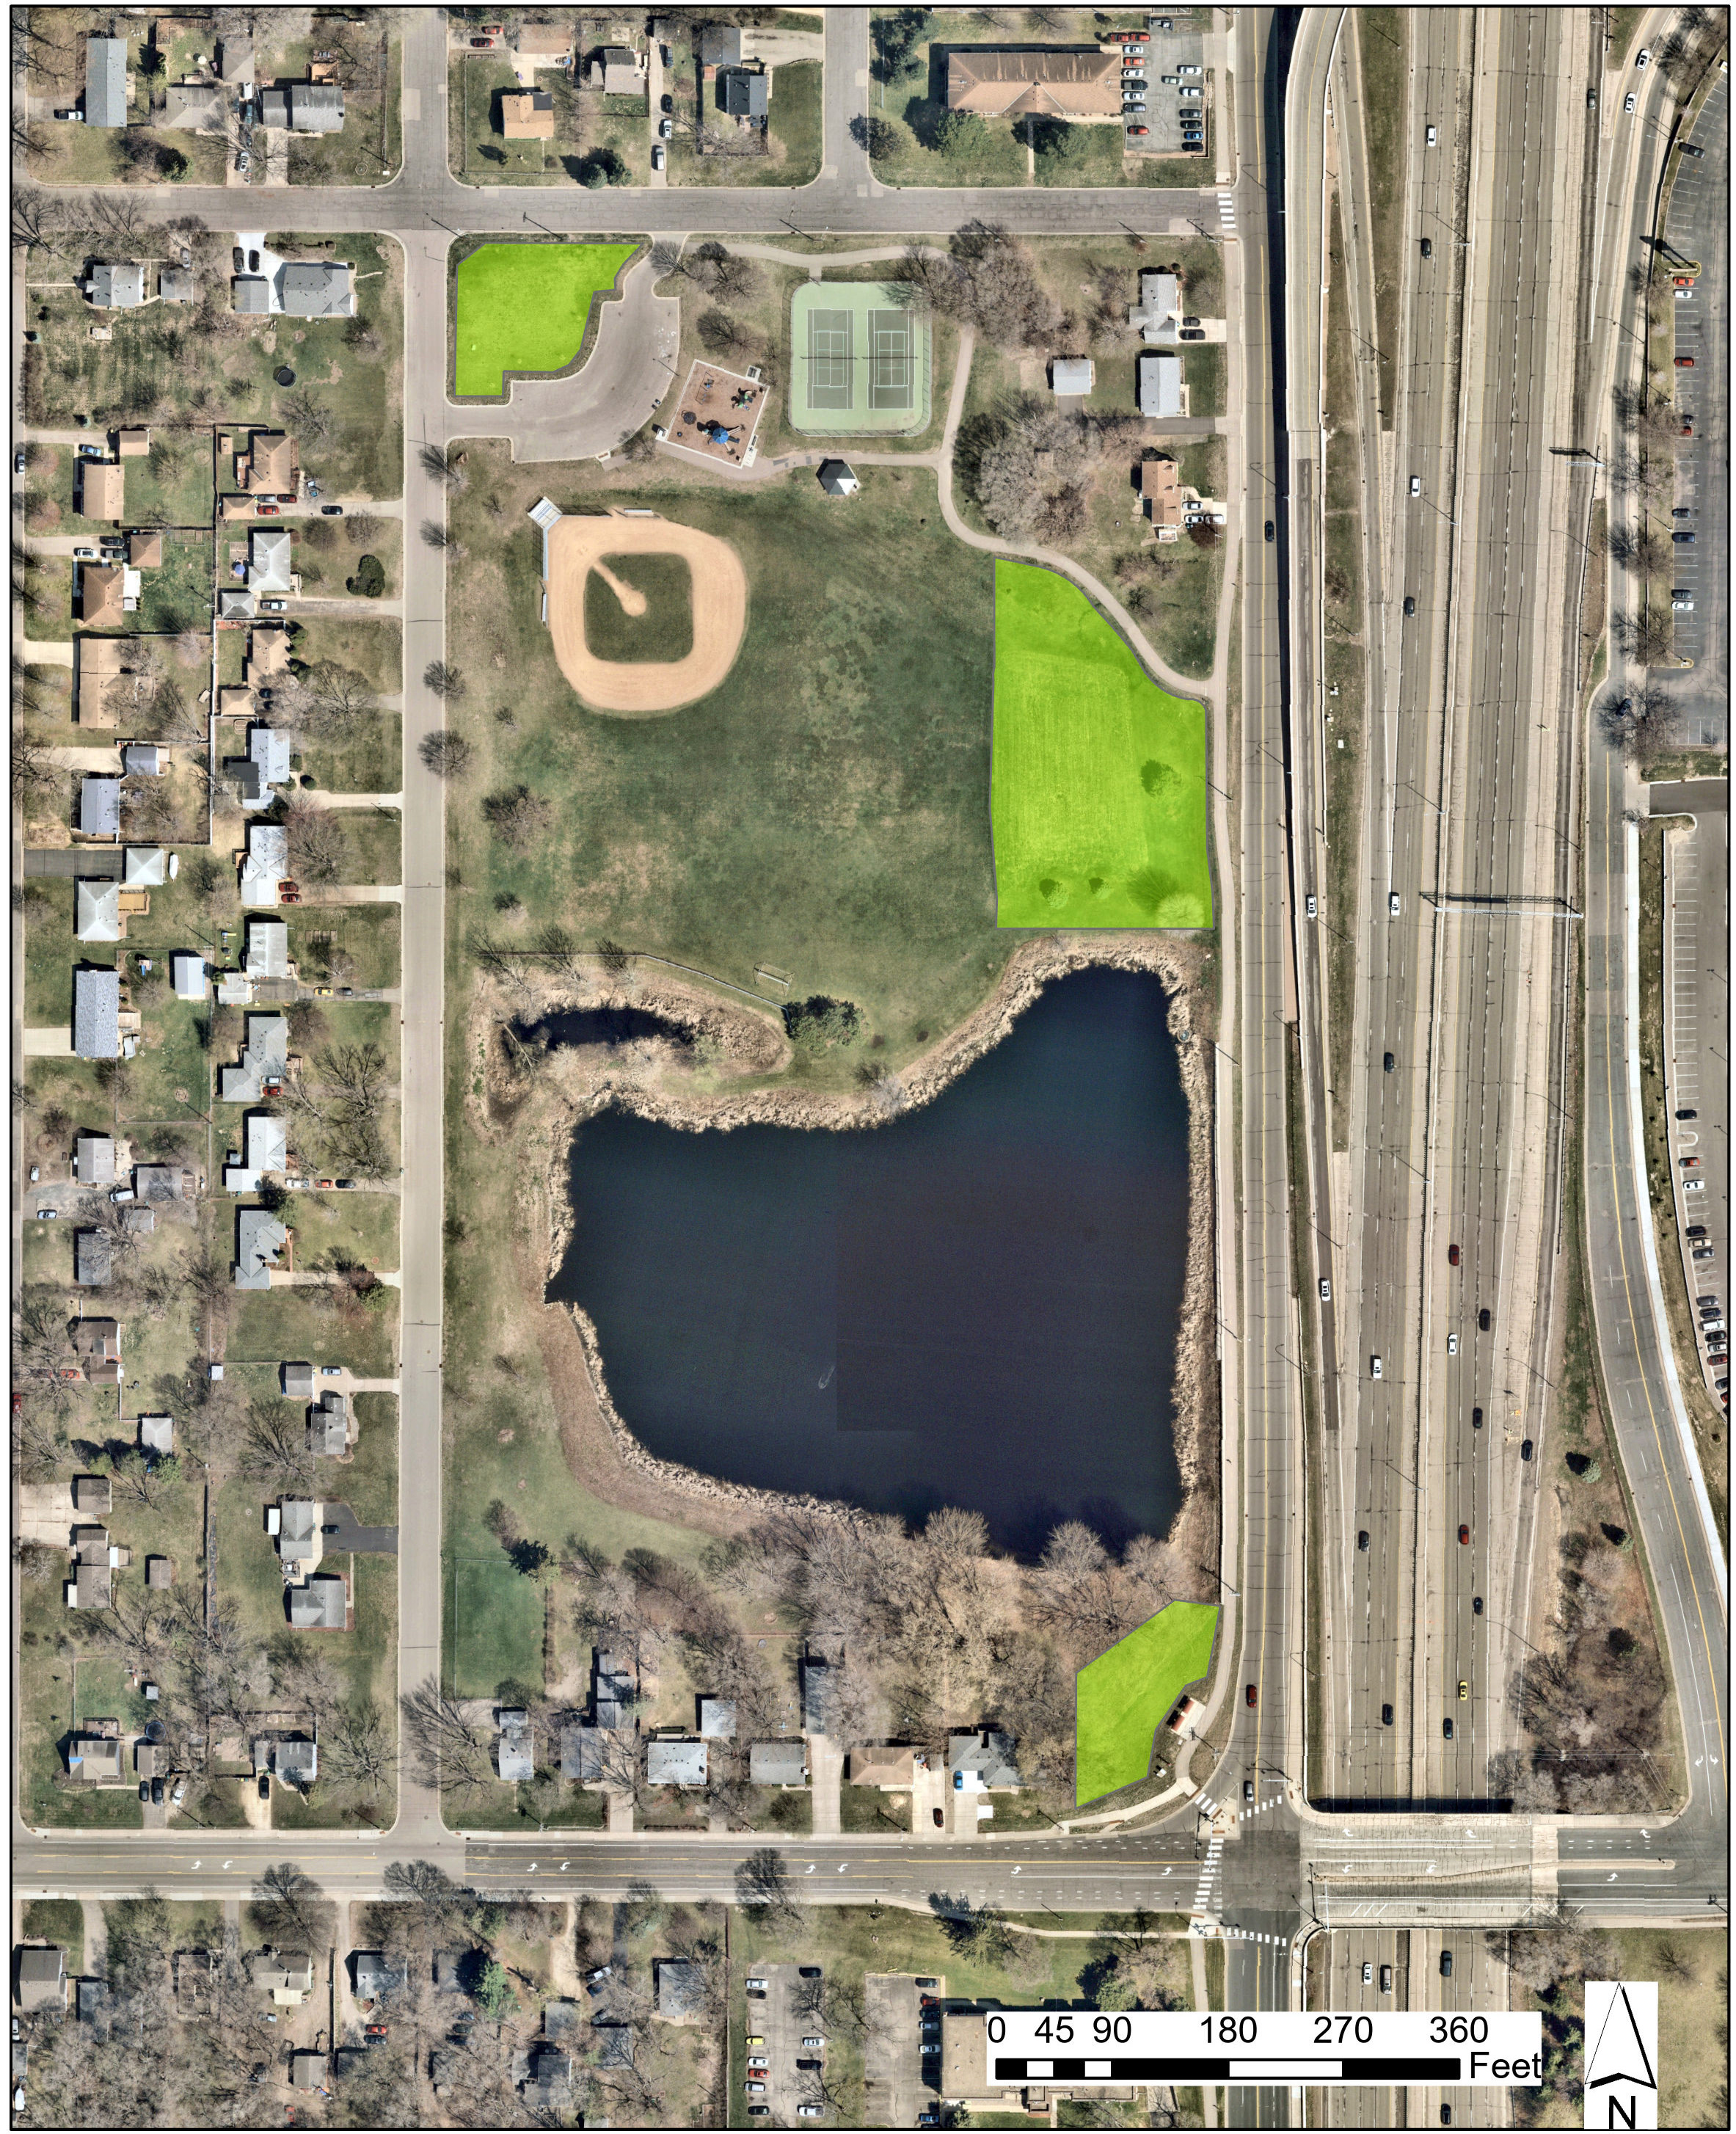 Wright's Lake Park overhead map with shaded areas for prairie restoration work